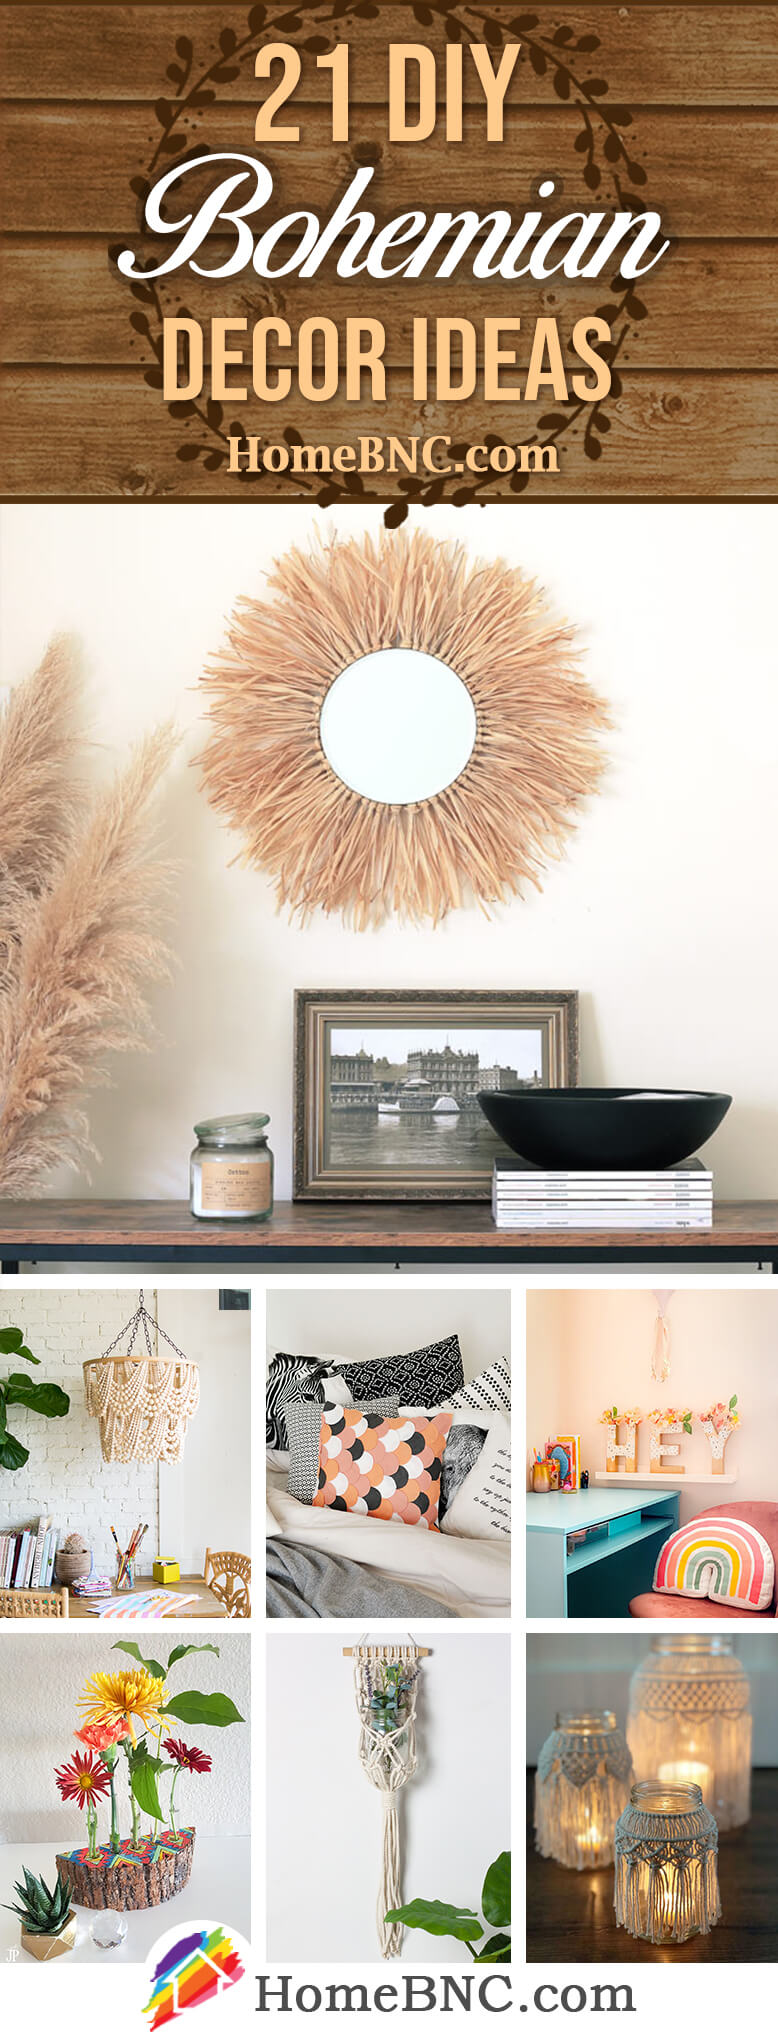 21 Best Diy Bohemian Decor Ideas You Can Easily Make Yourself In 2020